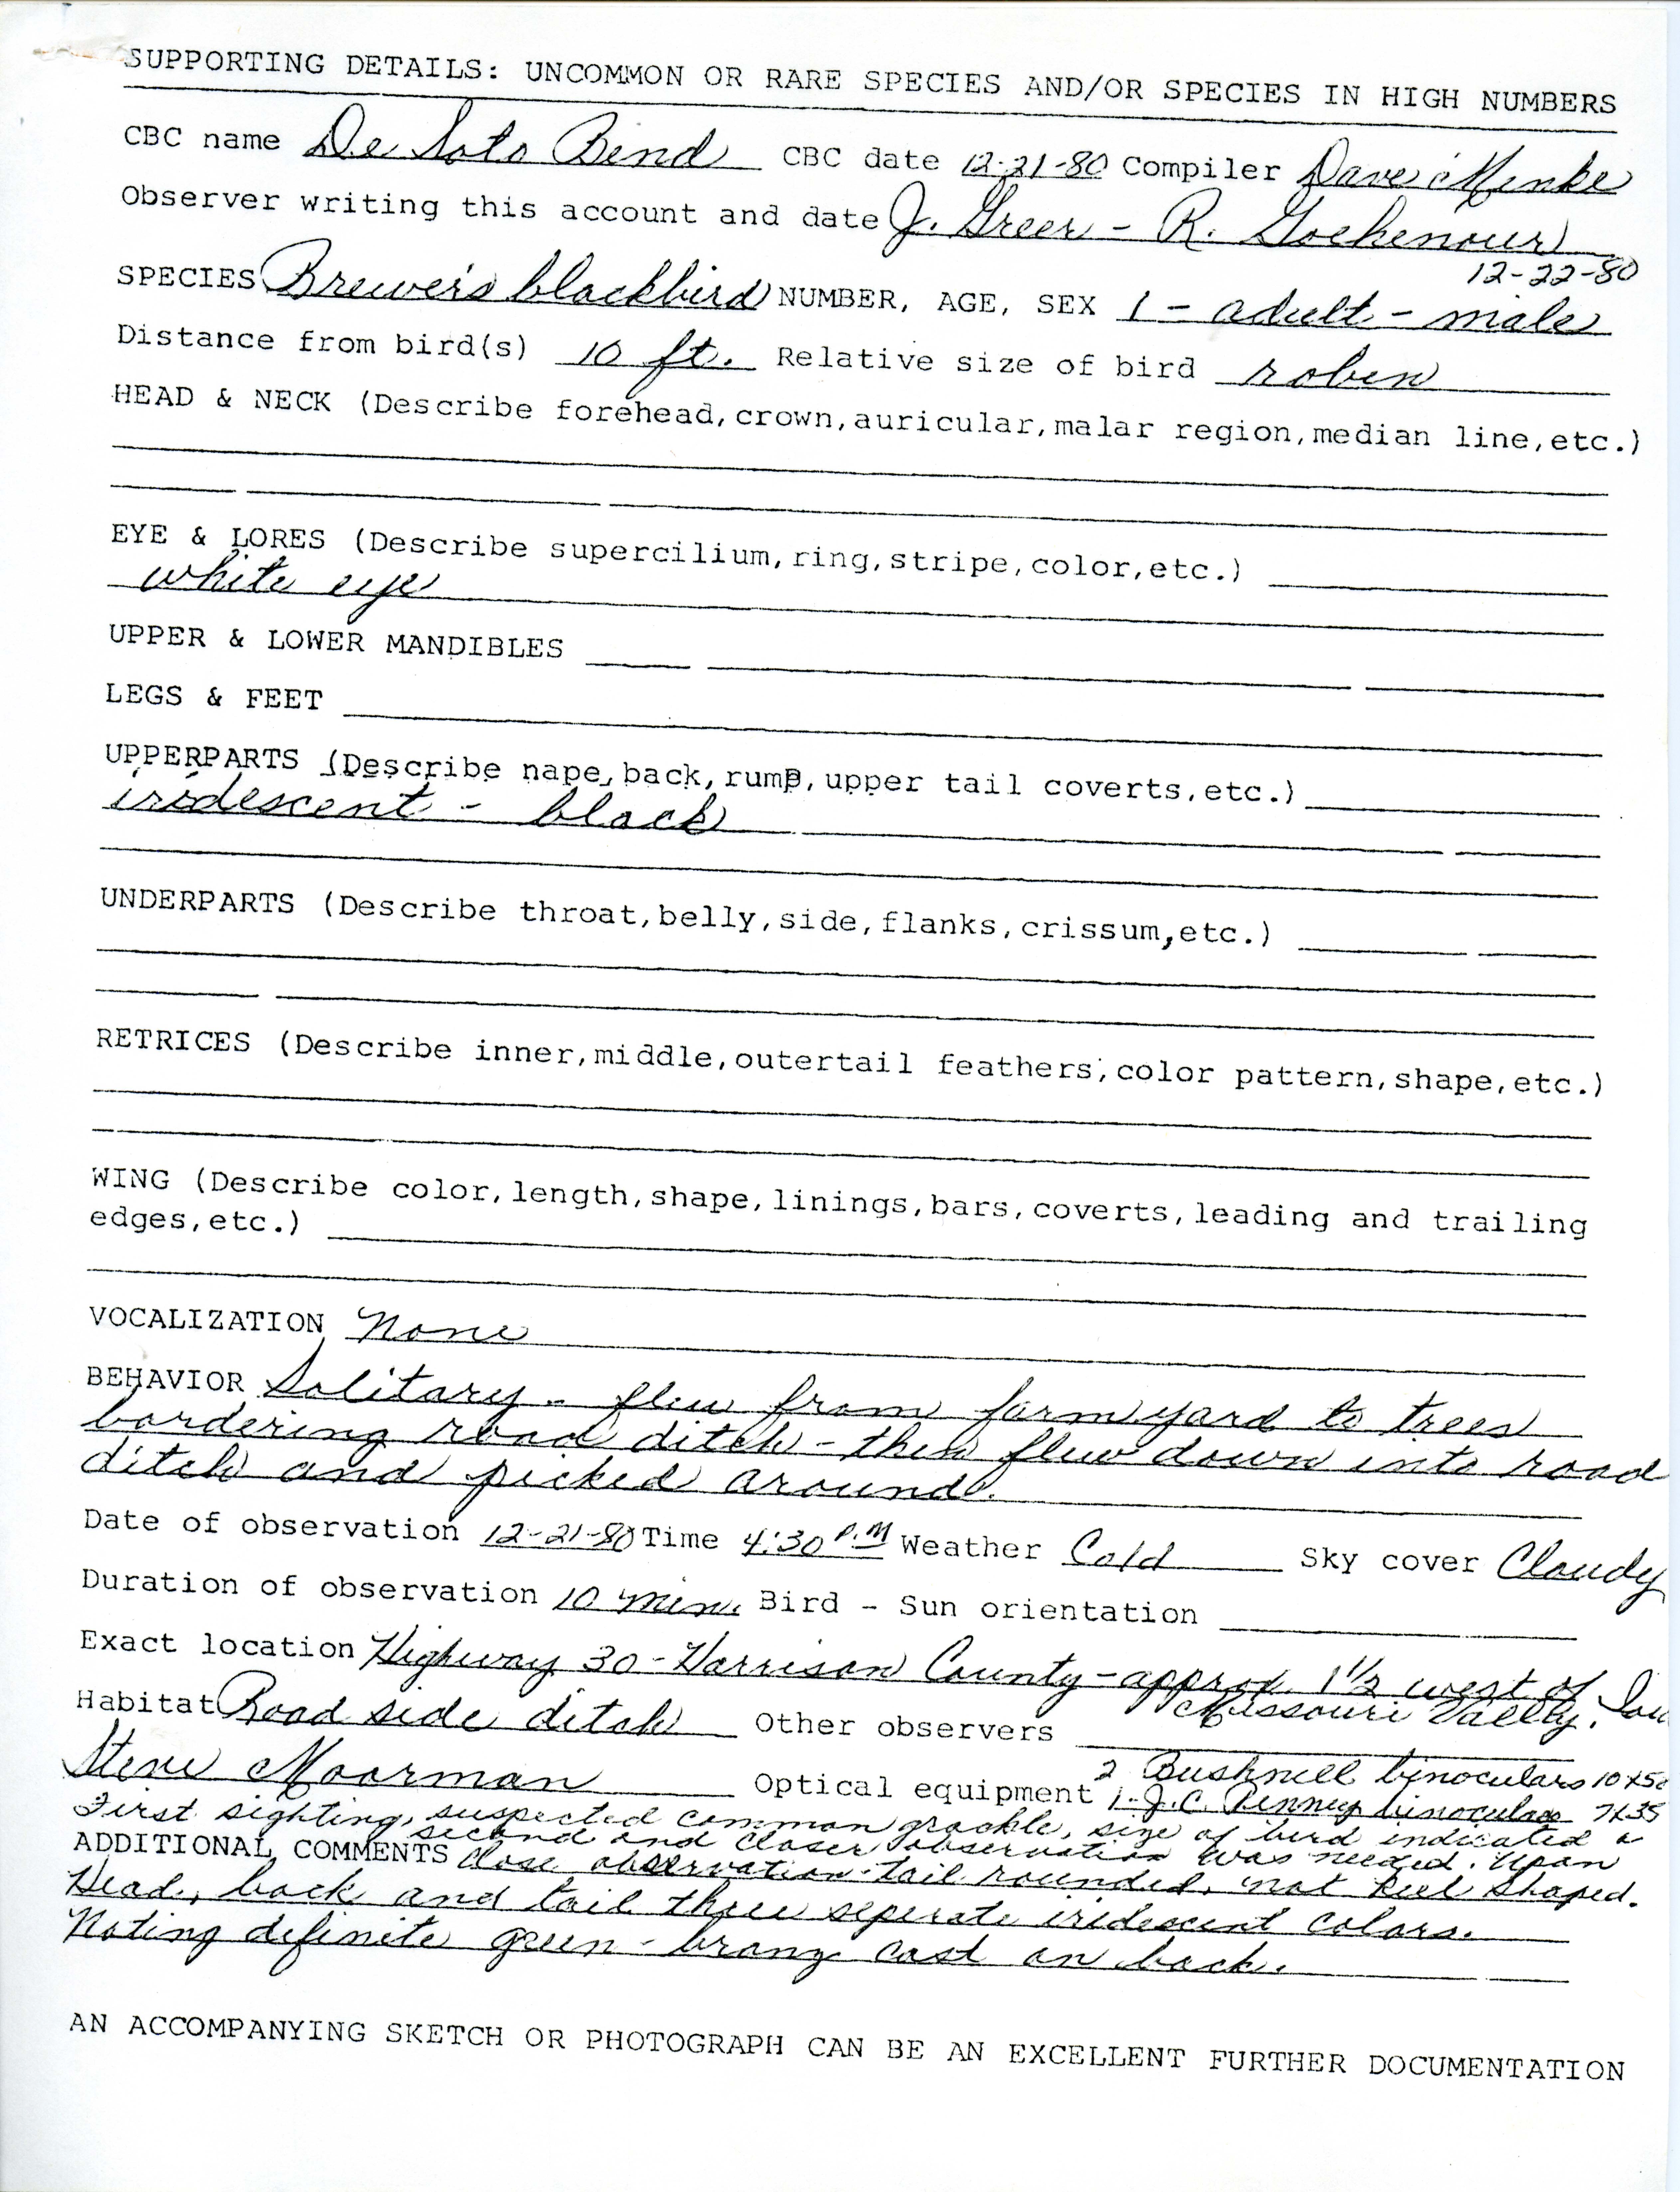 Supporting details form for Brewer's Blackbird sighting submitted by Janet G. Greer, December 21 1980